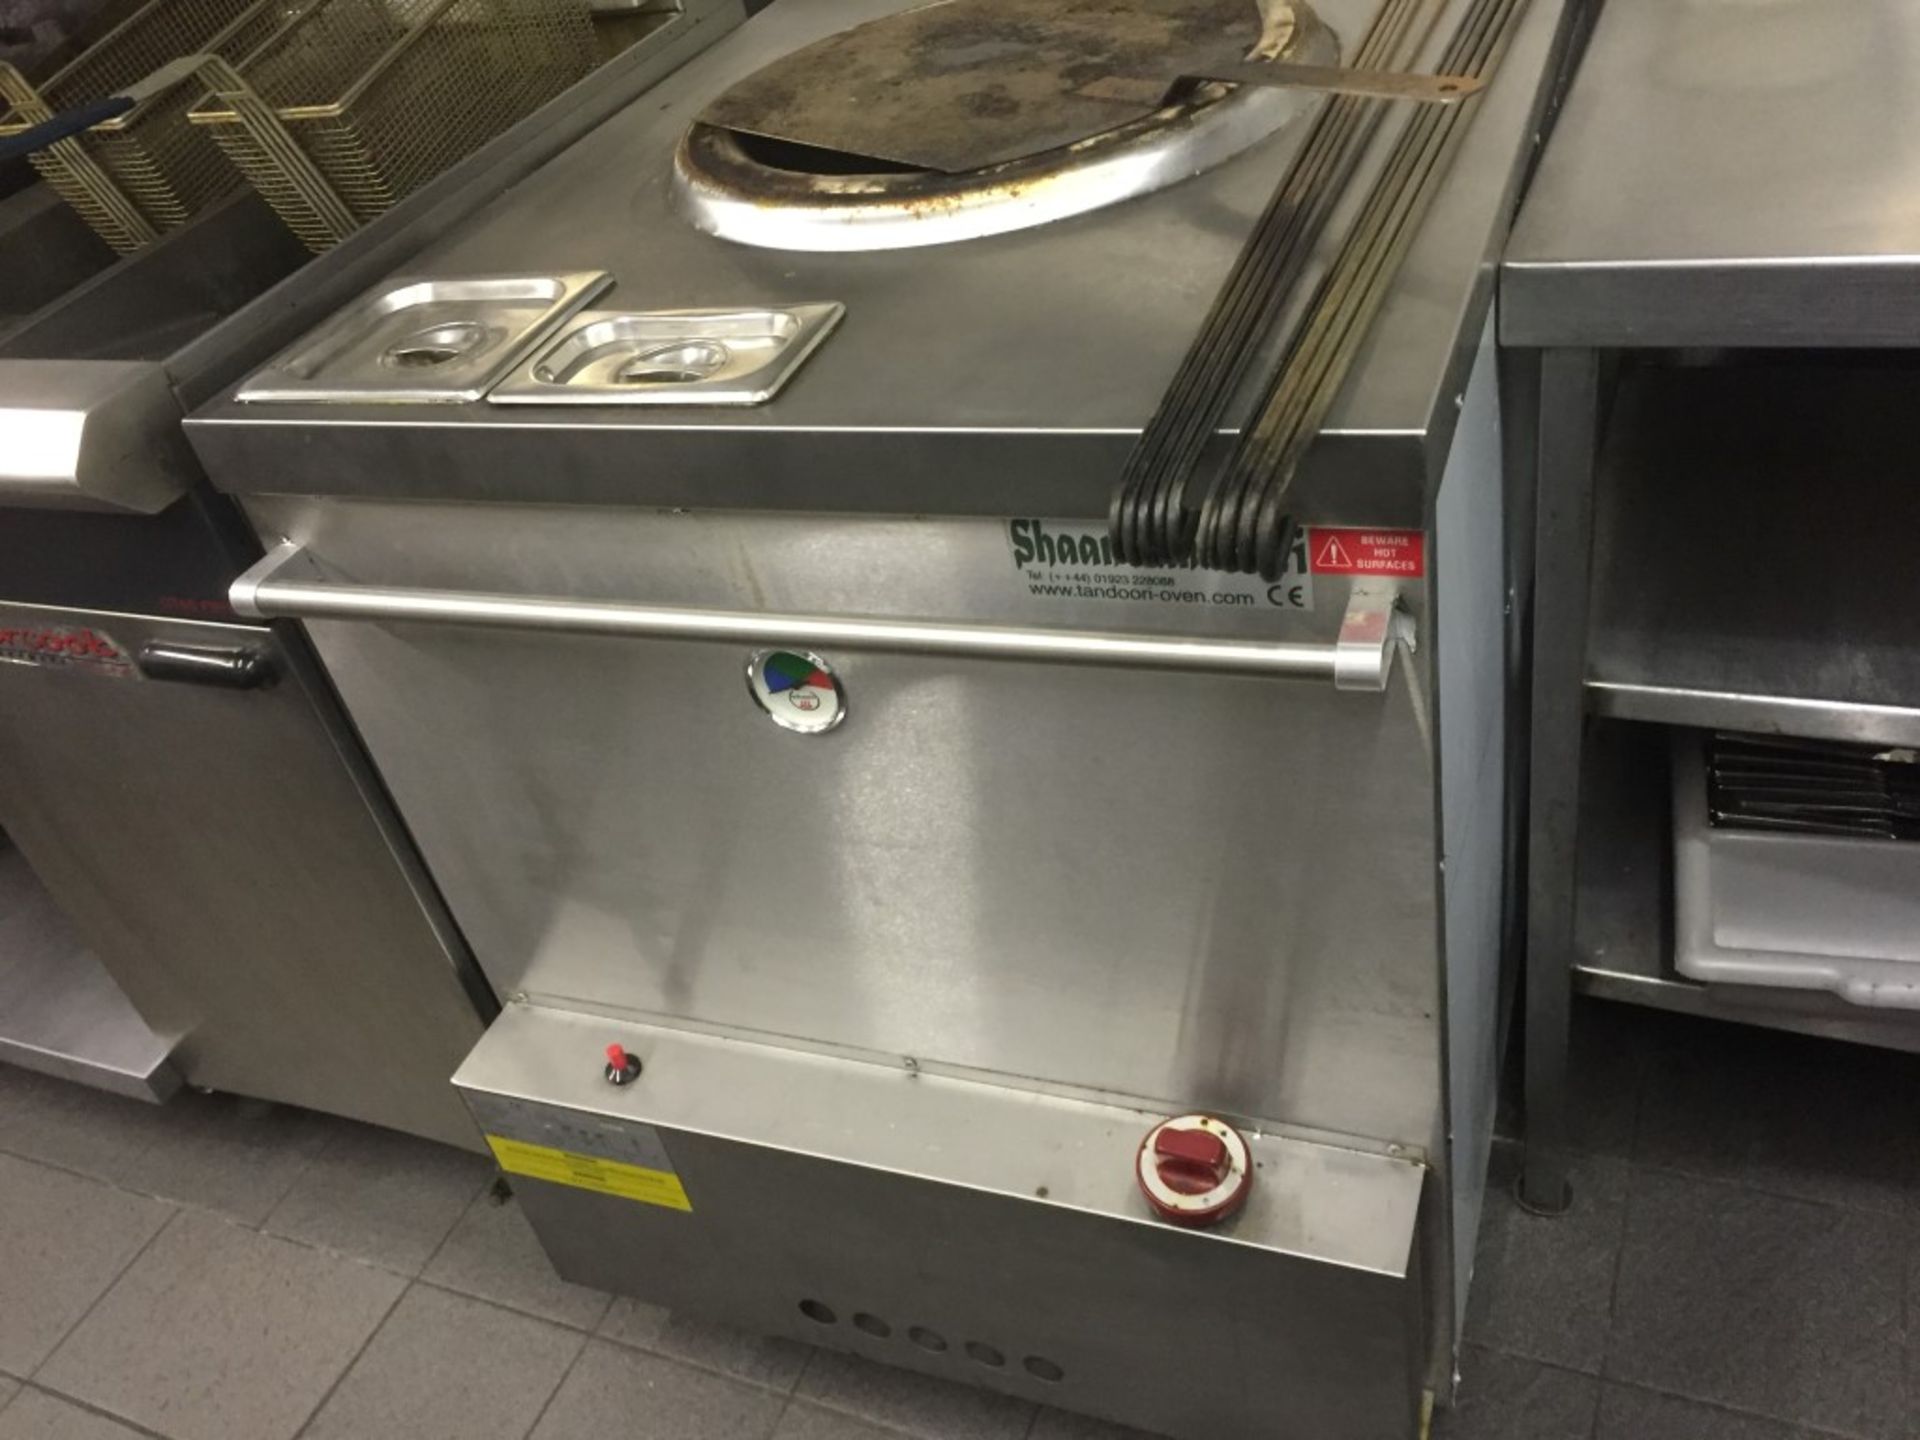 1 x Shaan Tandoori Commercial Oven - Dimensions: W71 x D76 x H86cm - Also Includes Skewers - Good Cl - Image 7 of 11